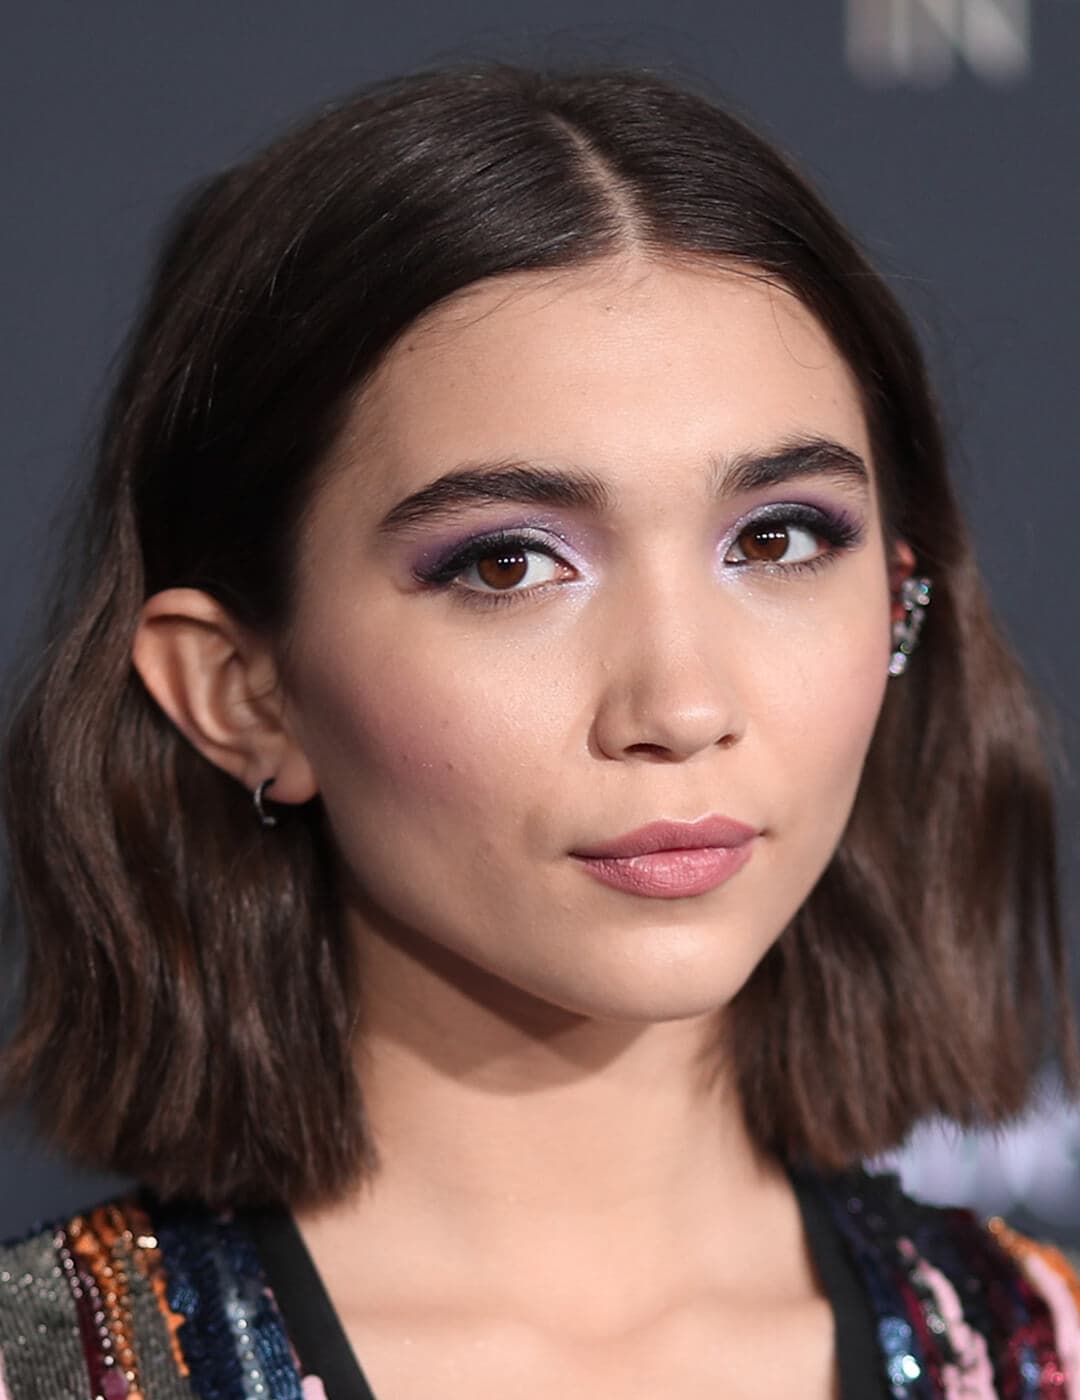 A photo of Rowan Blanchard with her hair tucked in both of her ears revealing her oval-shaped face on a black background